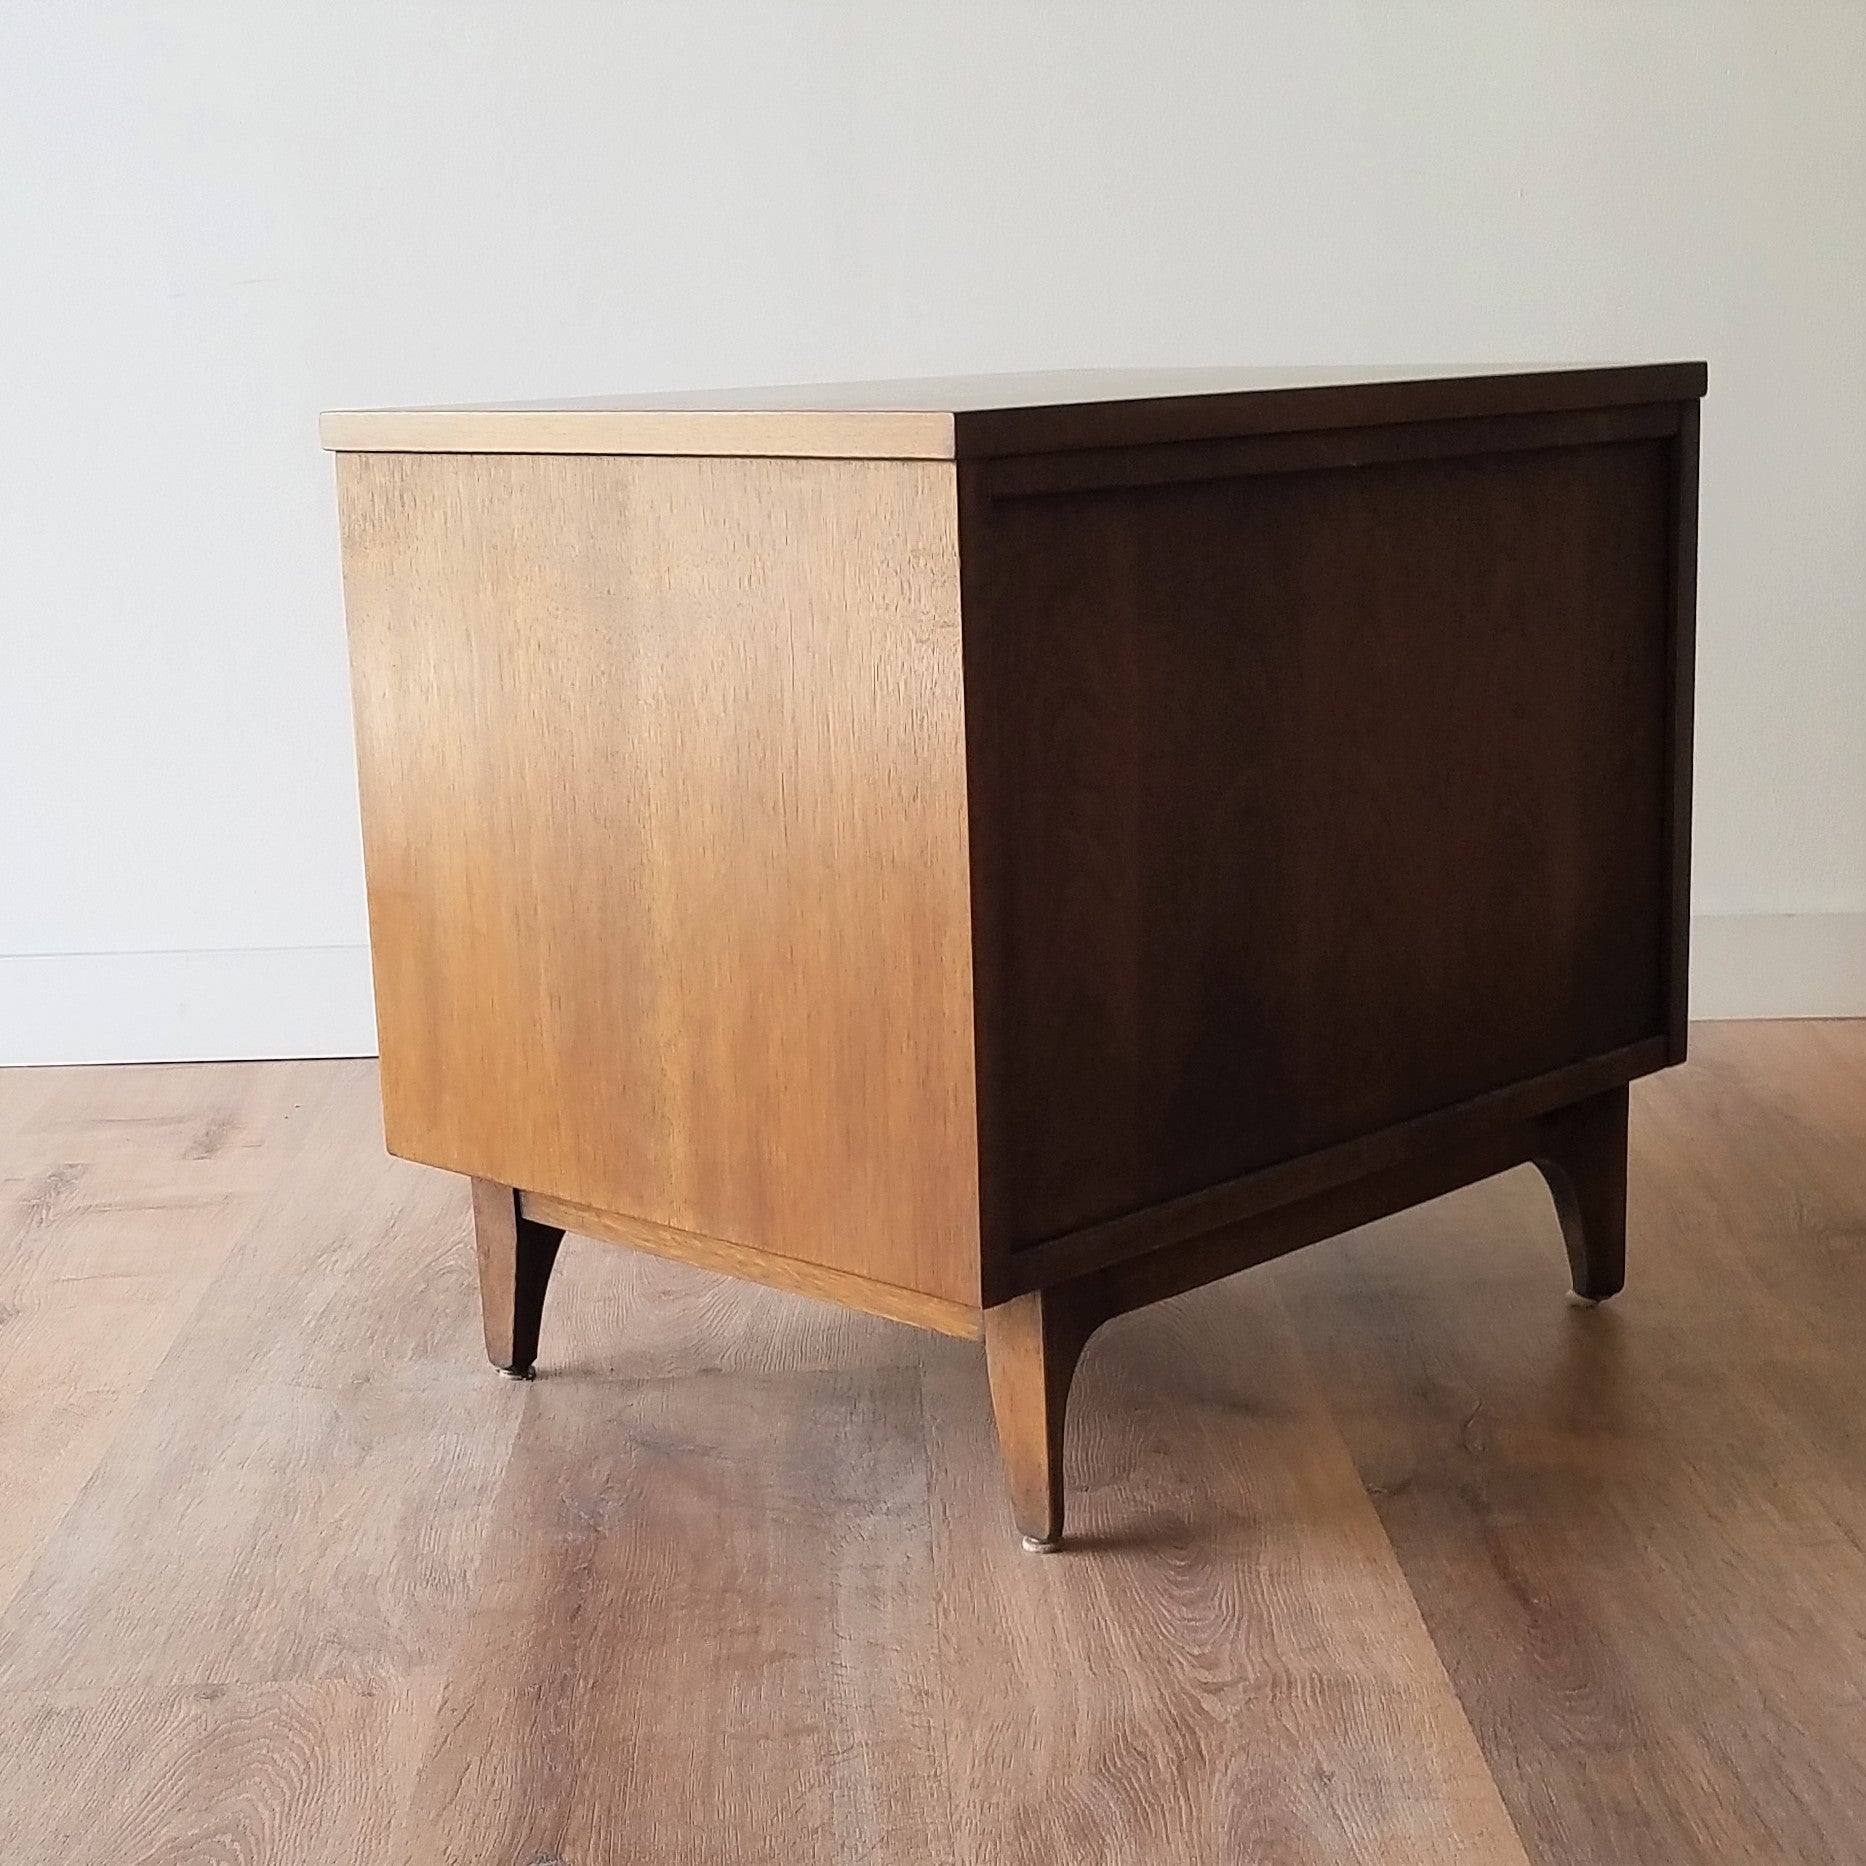 Back Quarter view of American Mid-Century Modern Brasilia Bed Side Table by Broyhill in Seattle, WA.